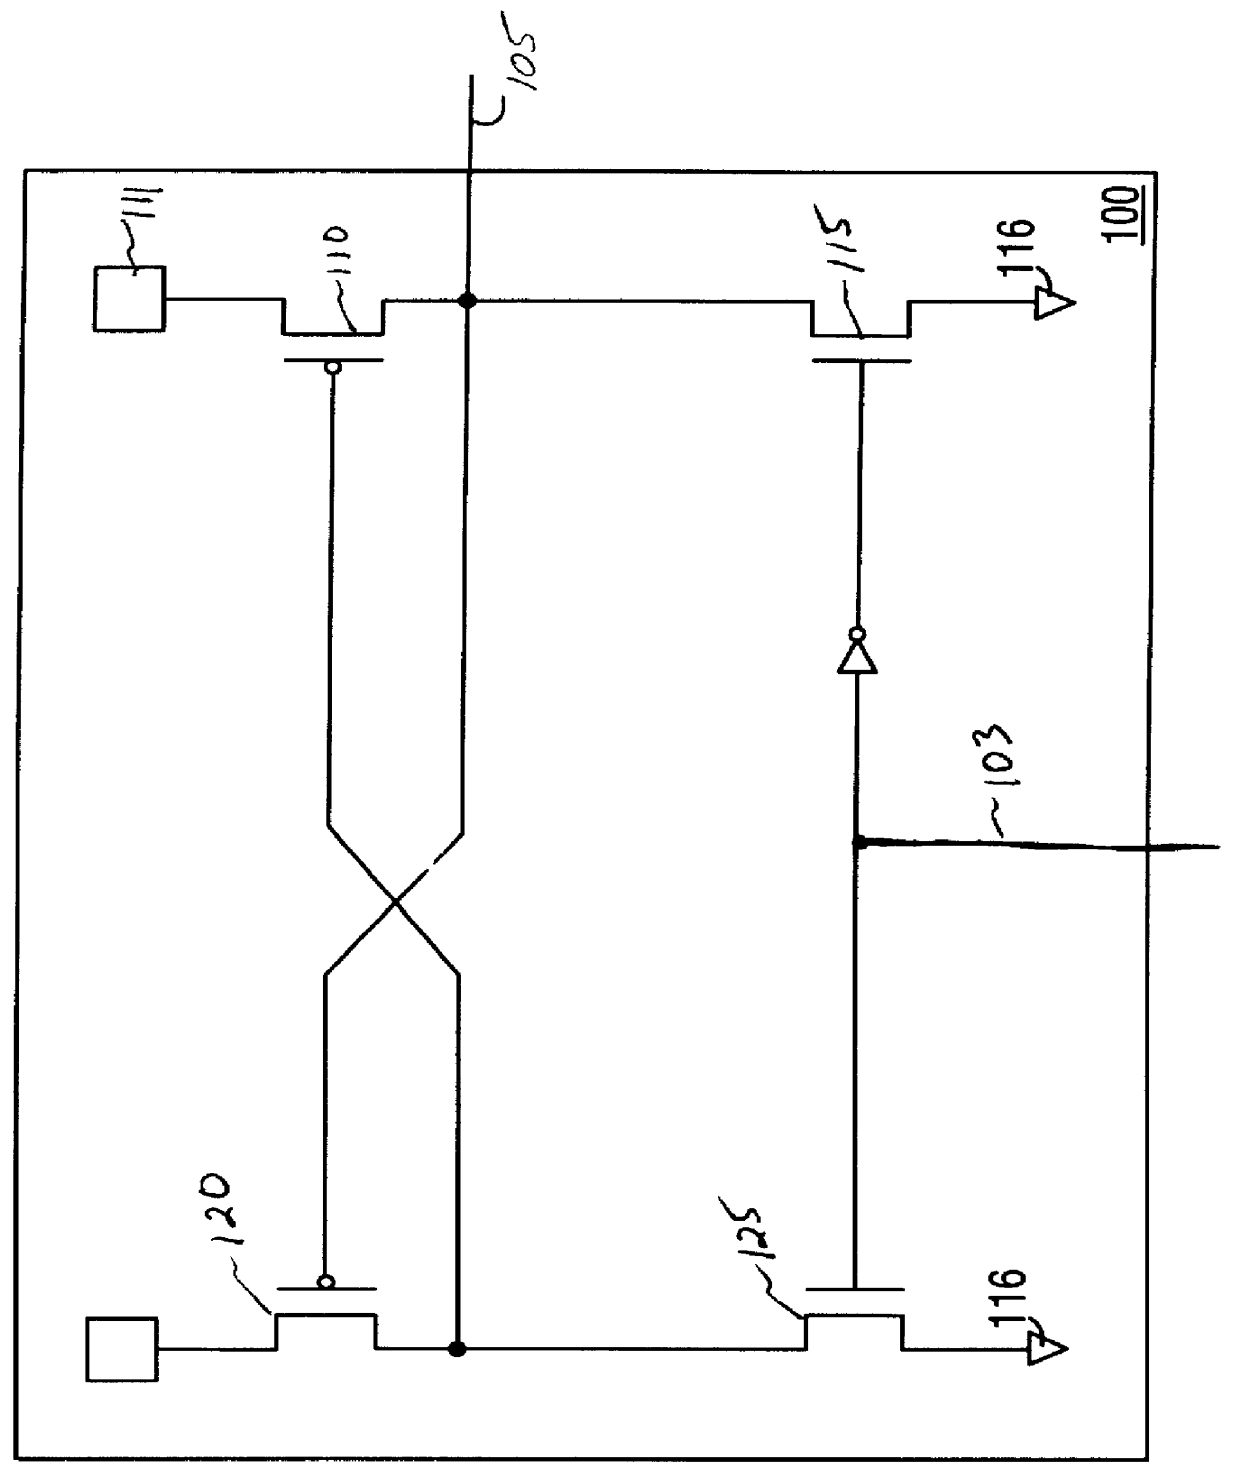 Output buffer for a mixed voltage environment